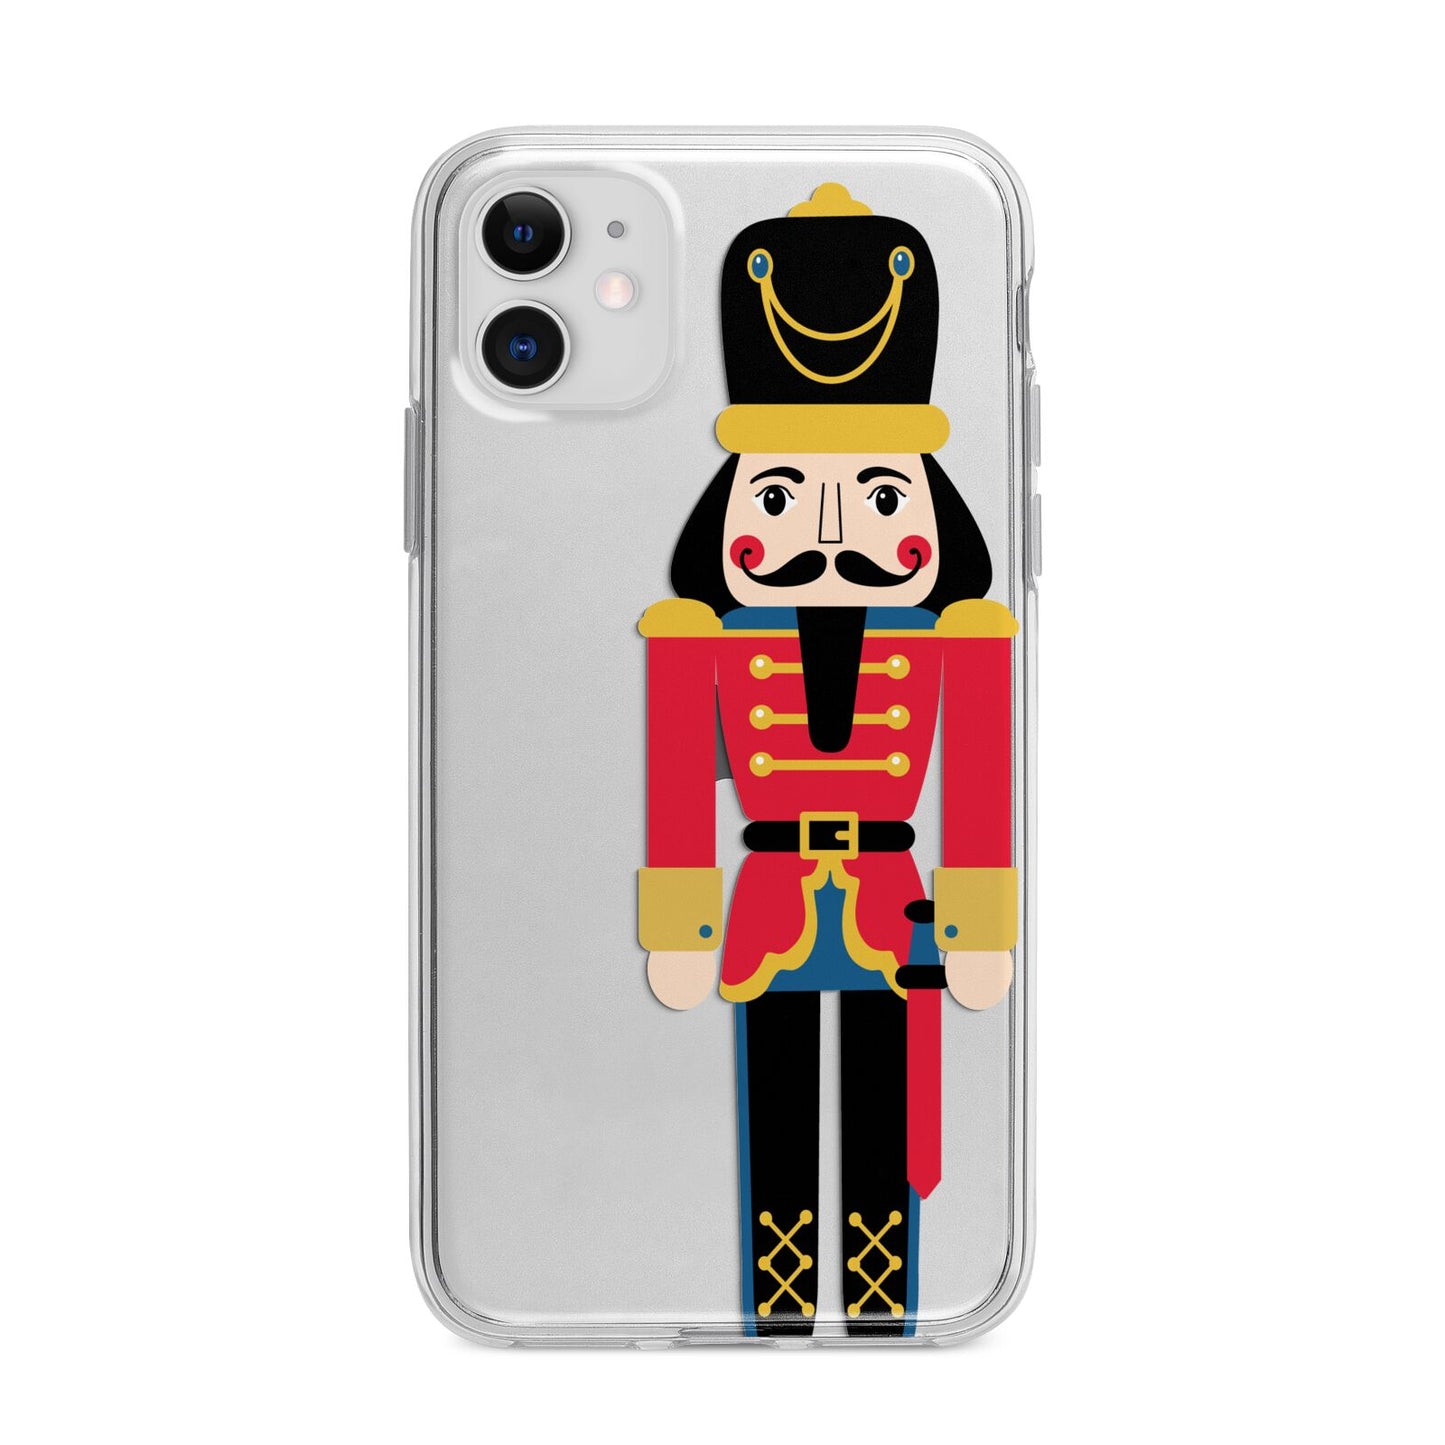 The Nutcracker Apple iPhone 11 in White with Bumper Case